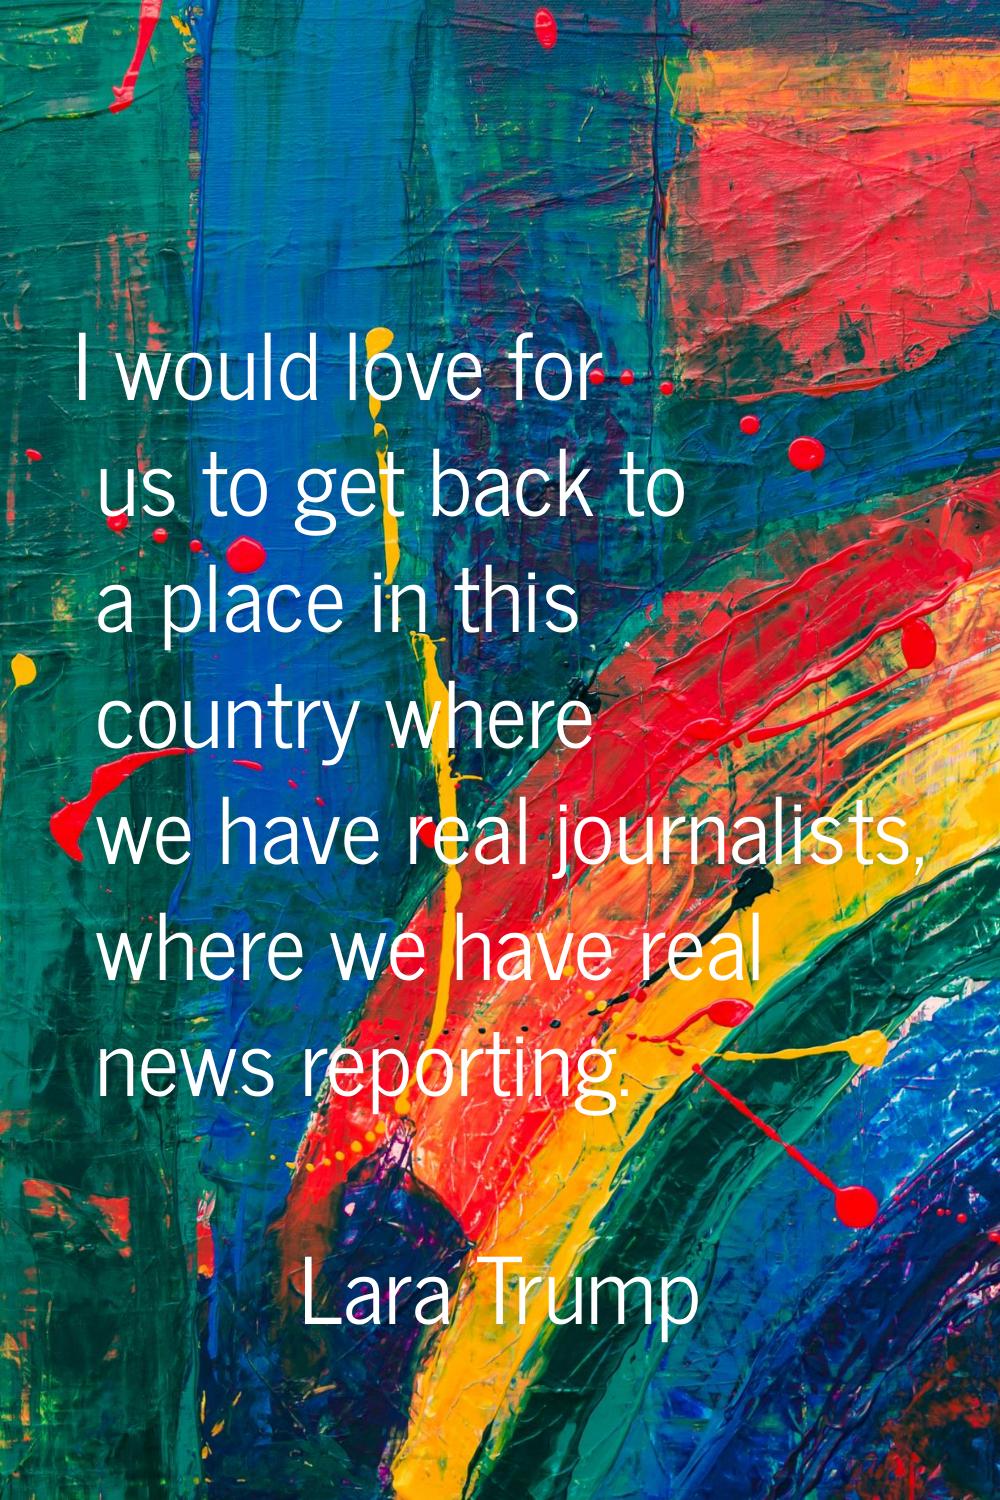 I would love for us to get back to a place in this country where we have real journalists, where we